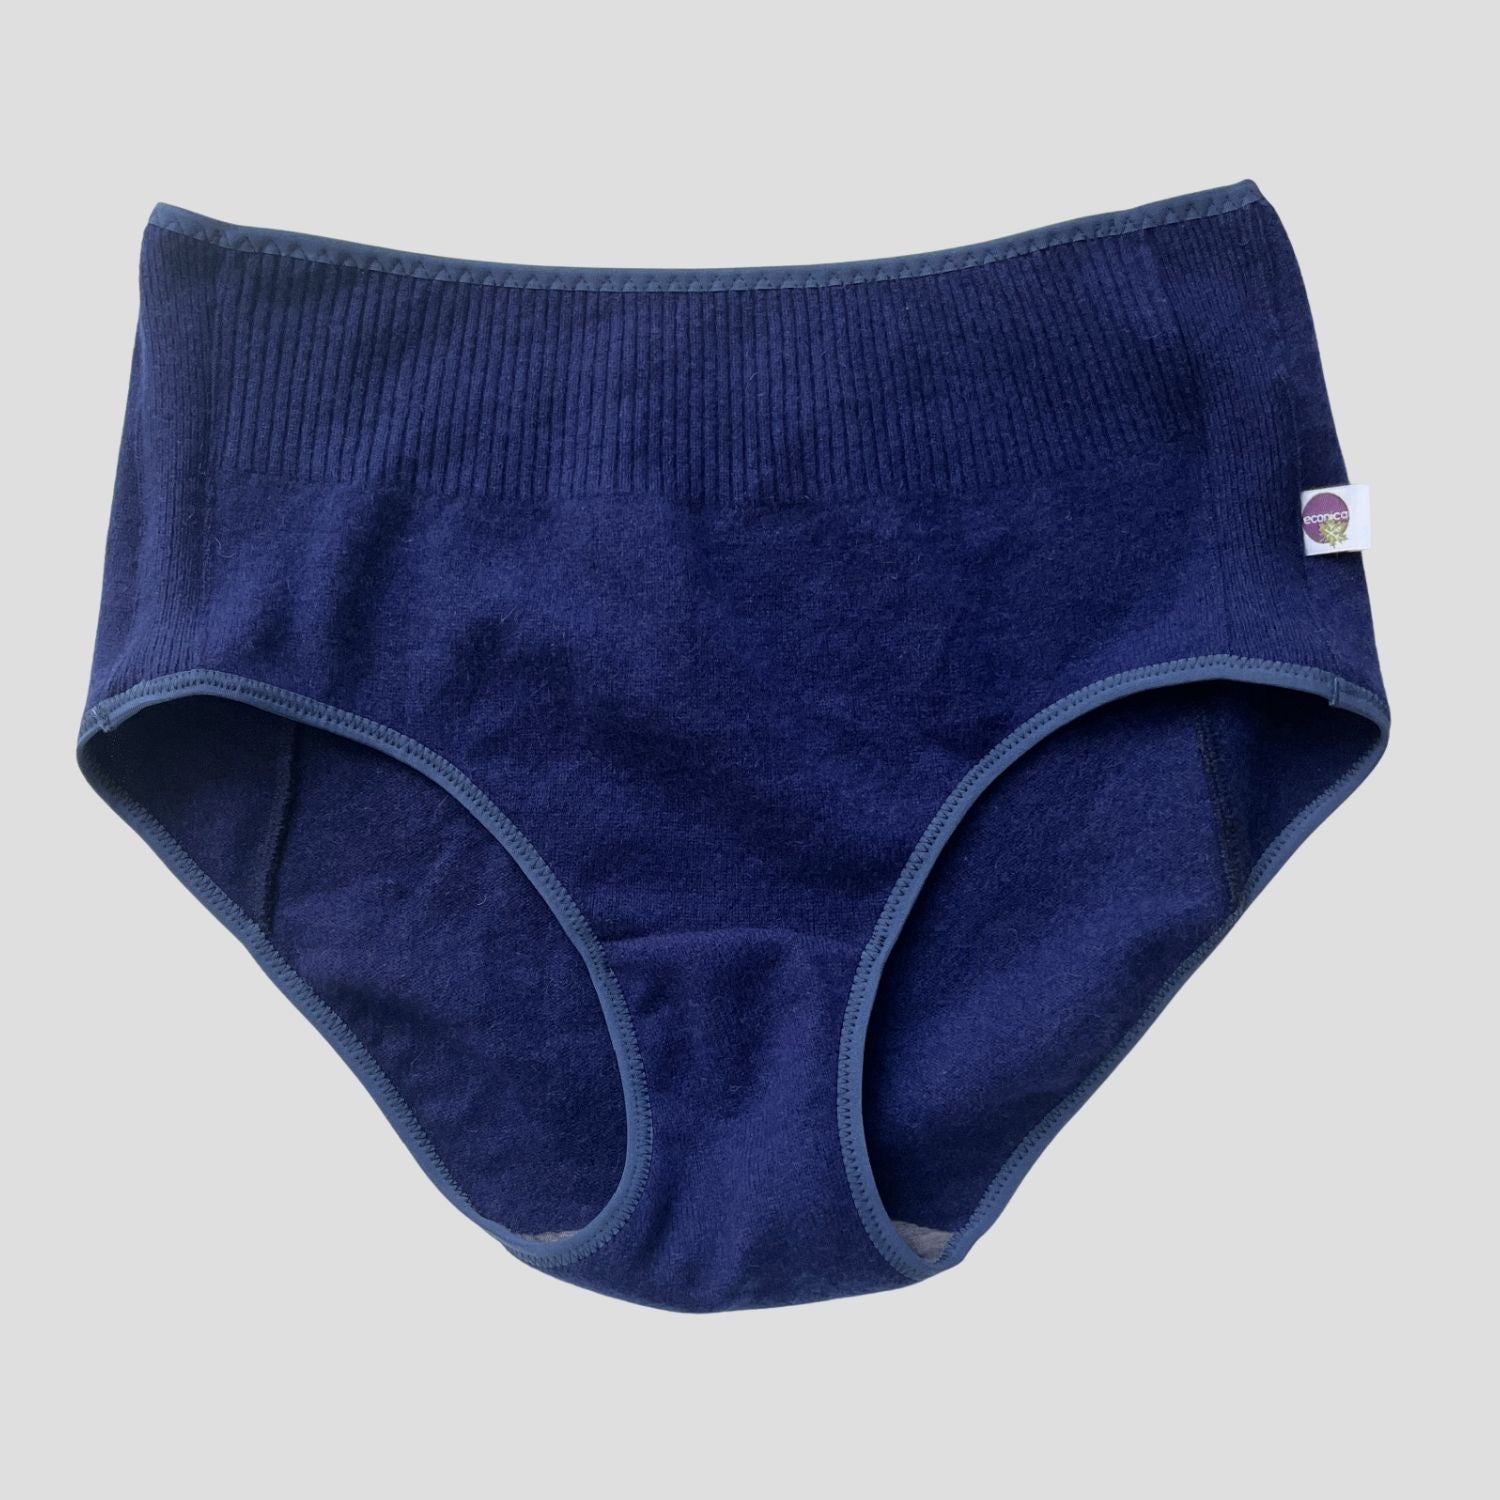 Hipster Cashmere women's brief | Made in Canada cashmere lingerie and underwear for ladies 